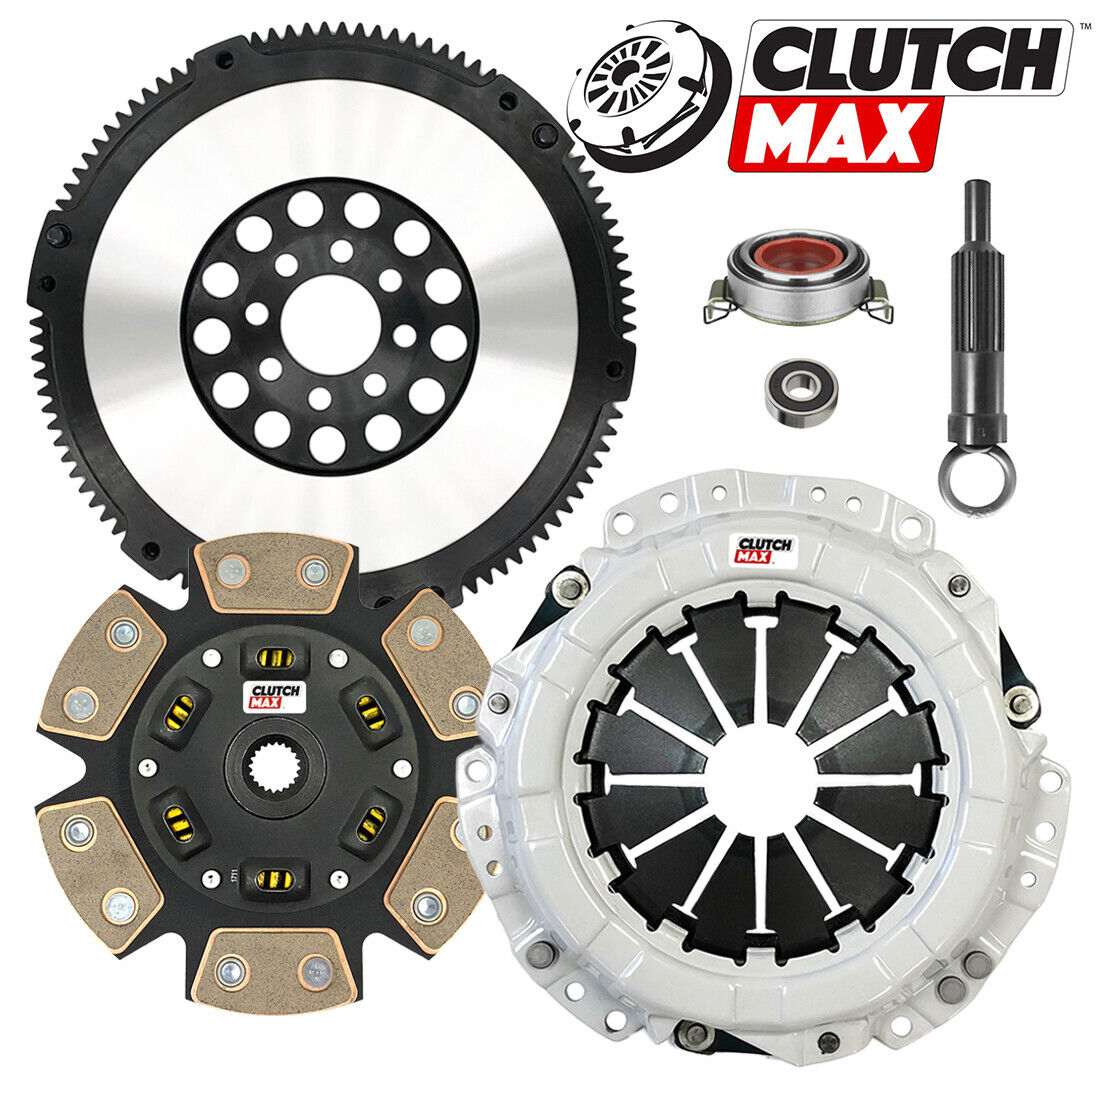 STAGE 3 RACING CLUTCH KIT and CHROMOLY FLYWHEEL for LOTUS ELISE EXIGE 2ZZ-GE